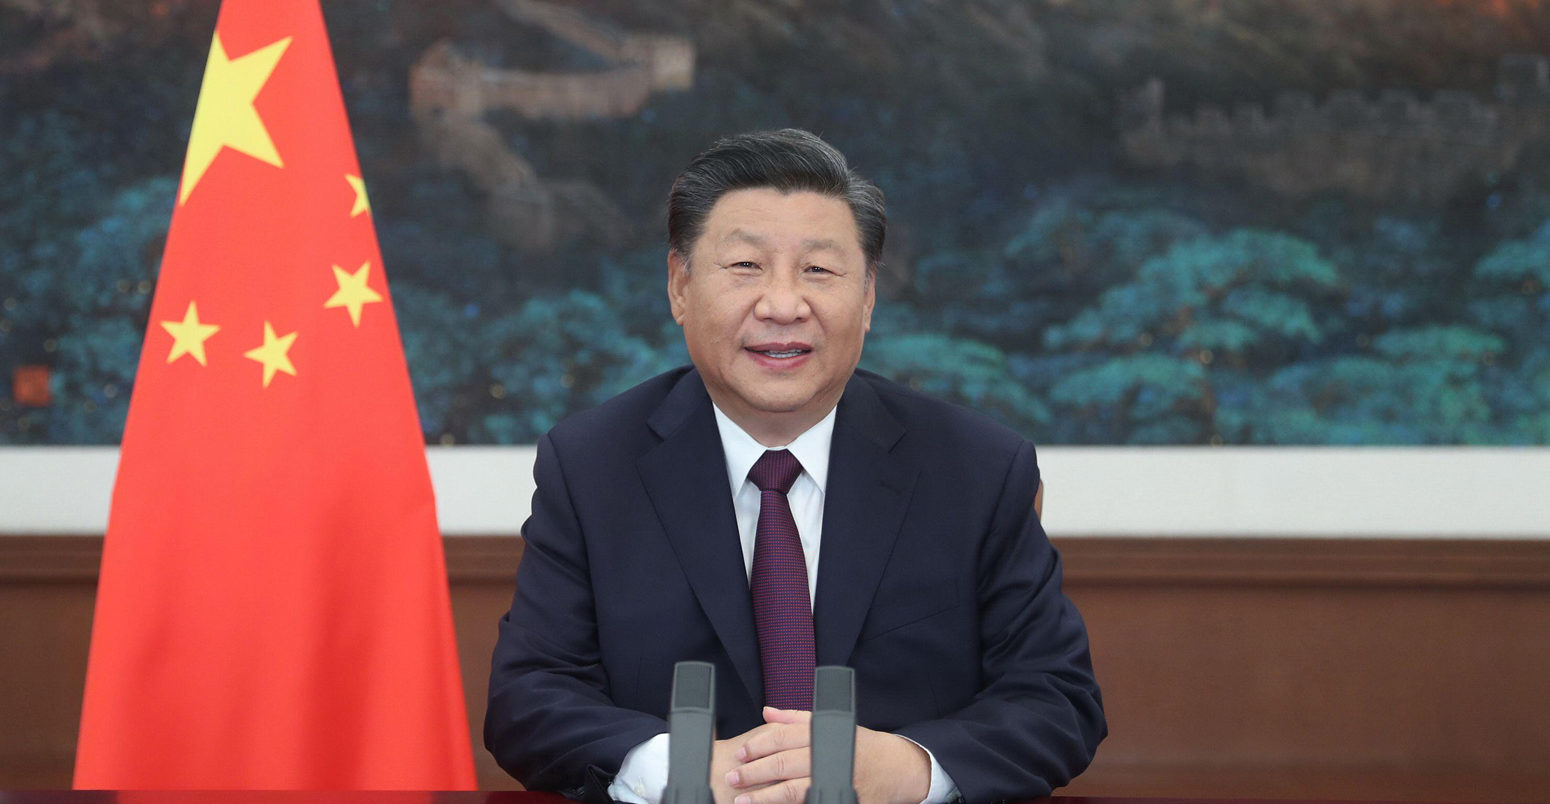 Chinese President Xi Jinping addresses the Global Trade in Services Summit.